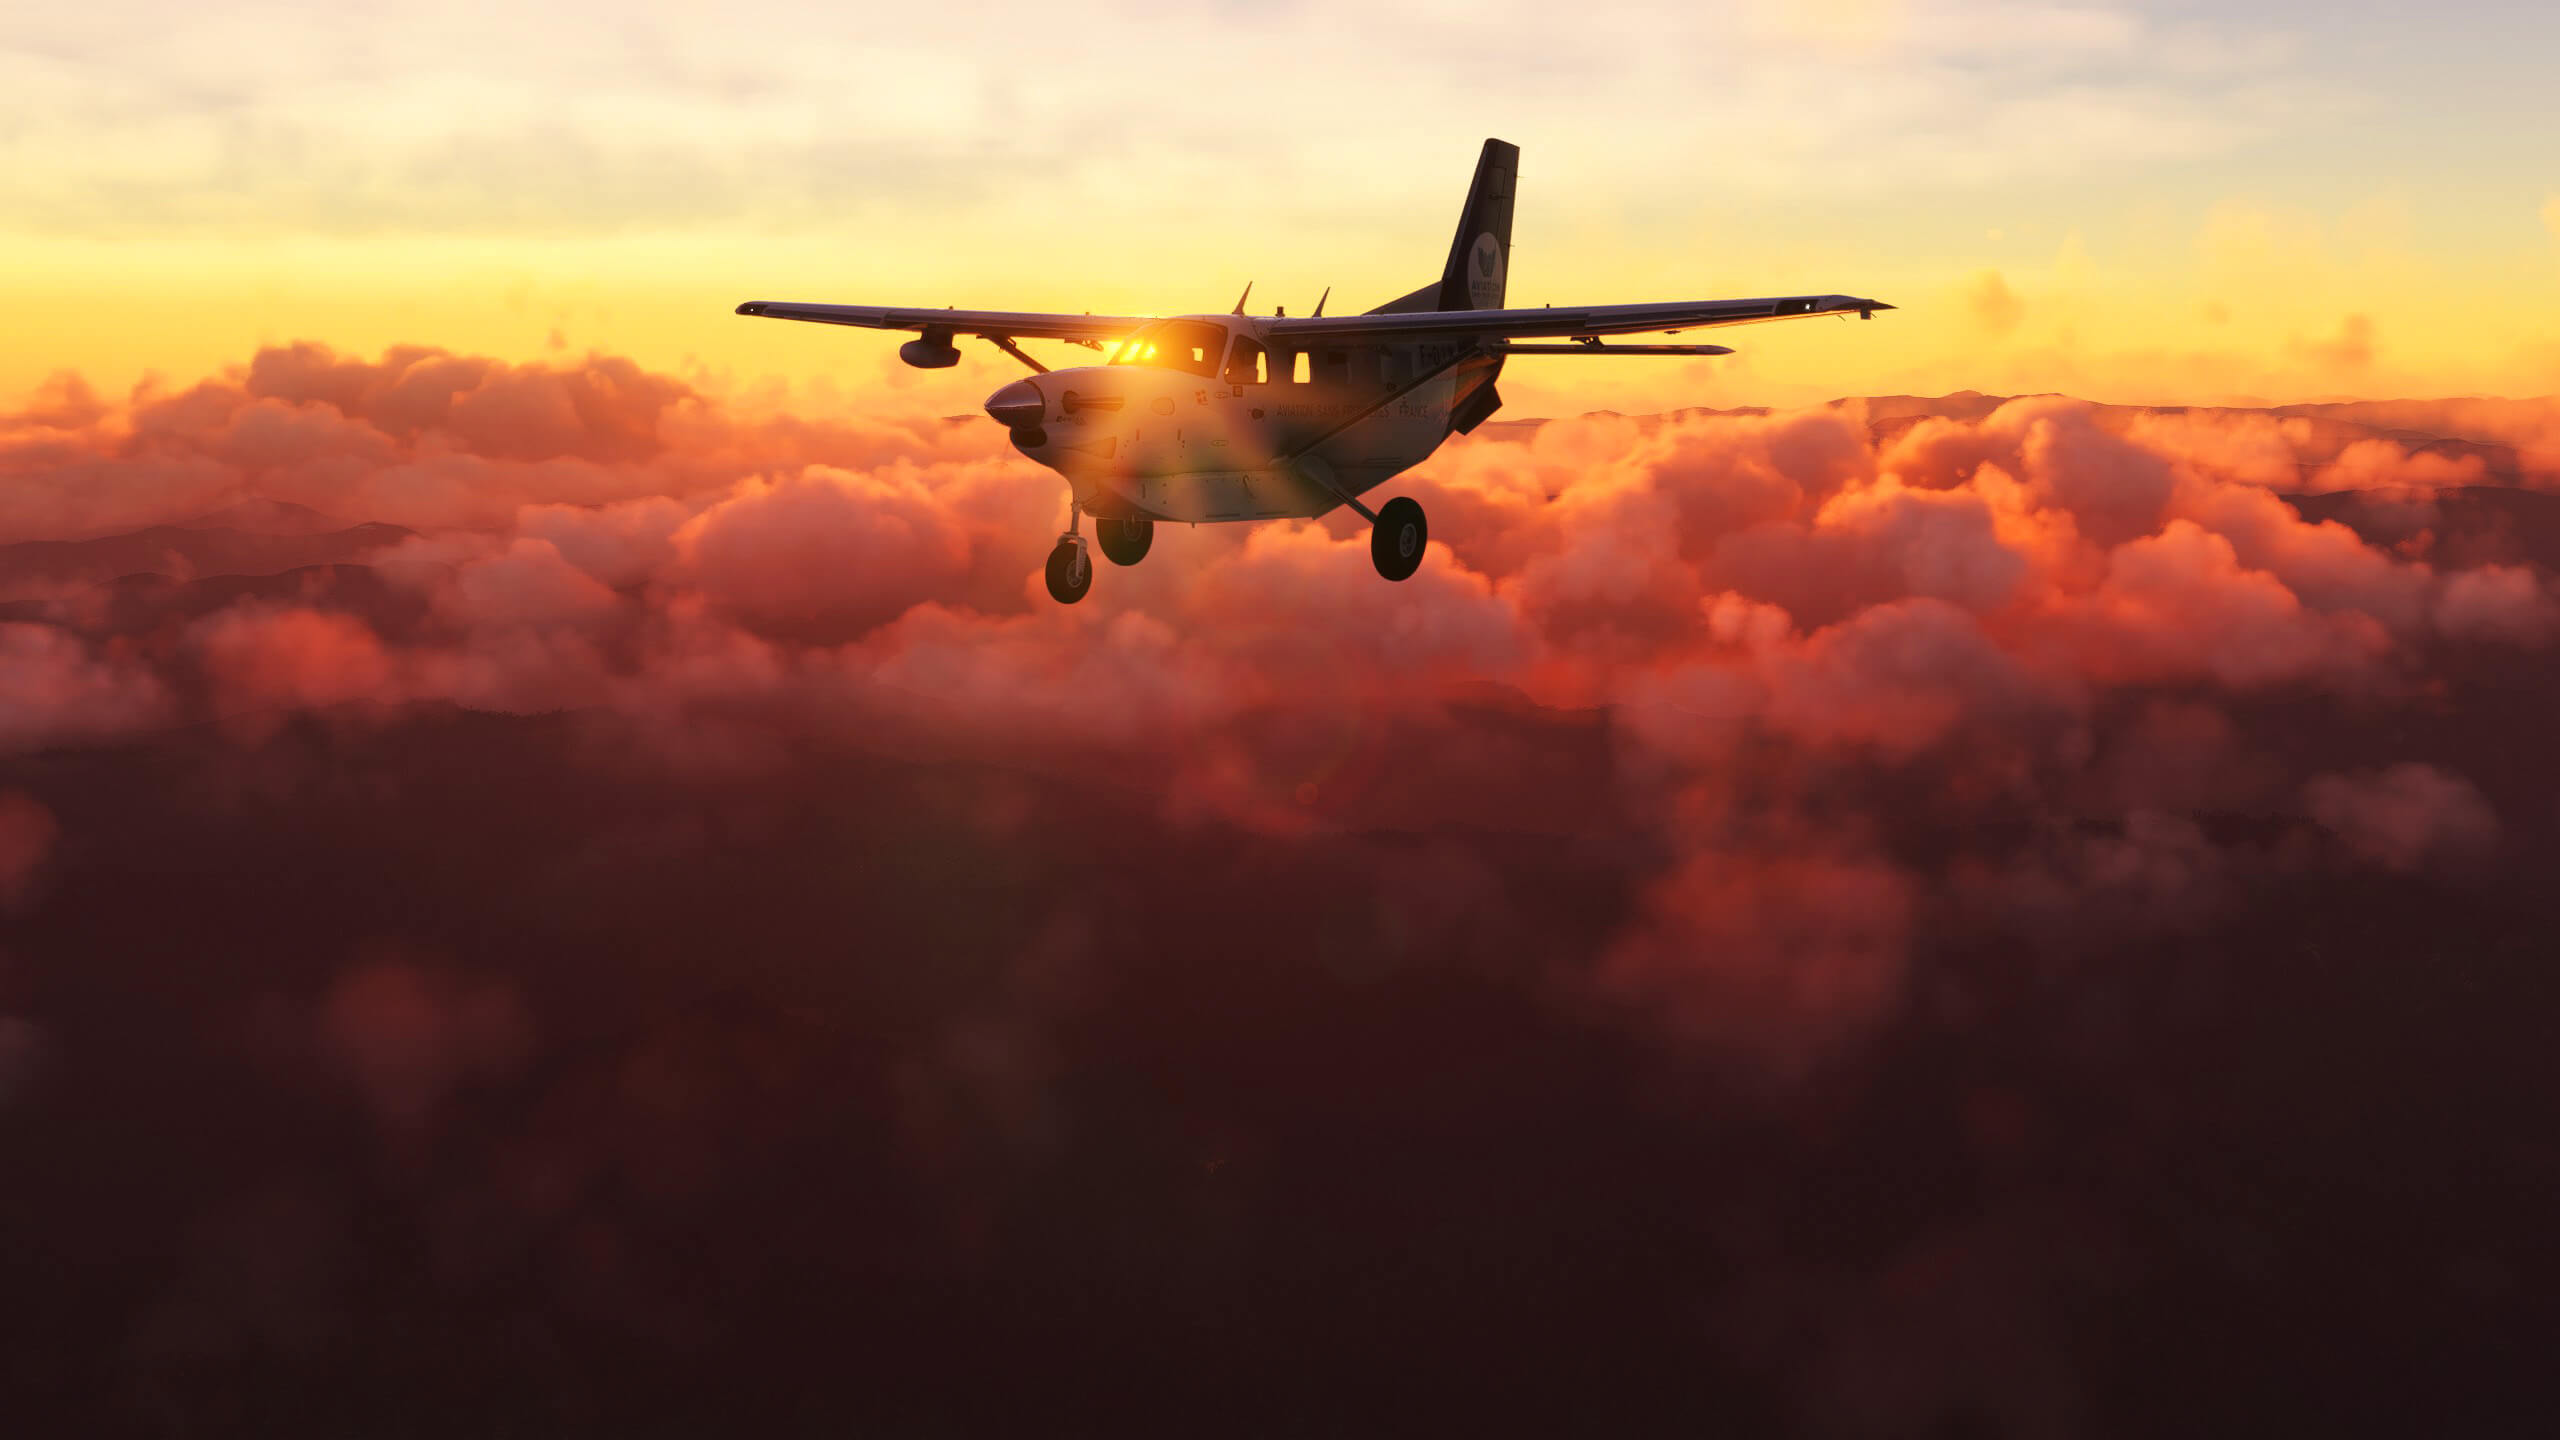 A Cessna Caravan cruises above cloud formations at sunset, with the sun reflecting through the cockpit windows